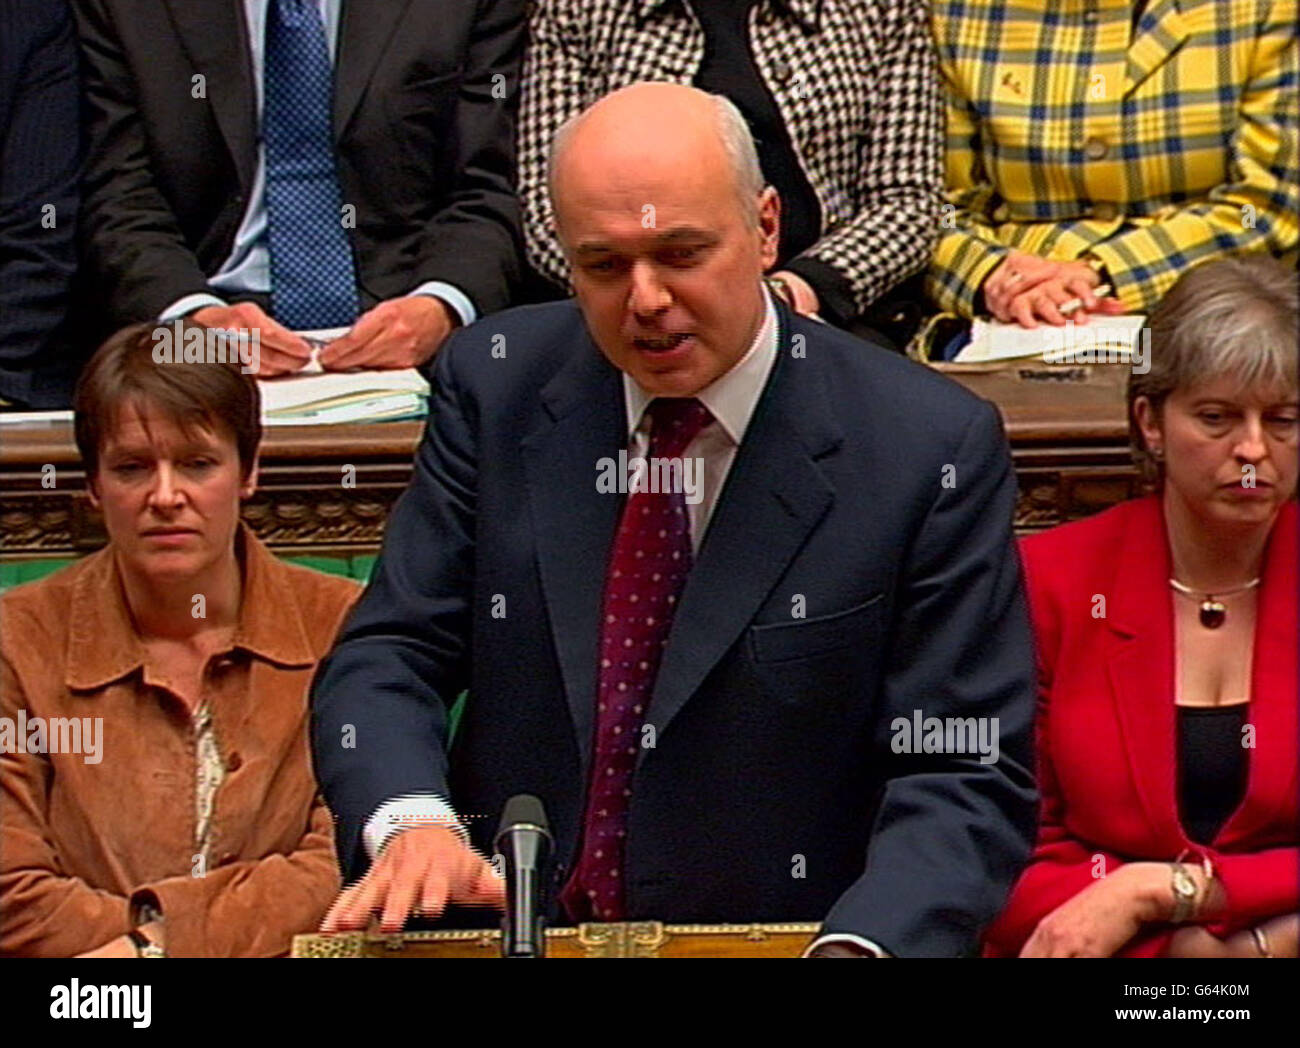 NOT FOR COMMERCIAL USE : Video grab of the Conservative Leader Iain Duncan Smith speaking during Prime Minister's Questions at the House of Commons, London. Stock Photo